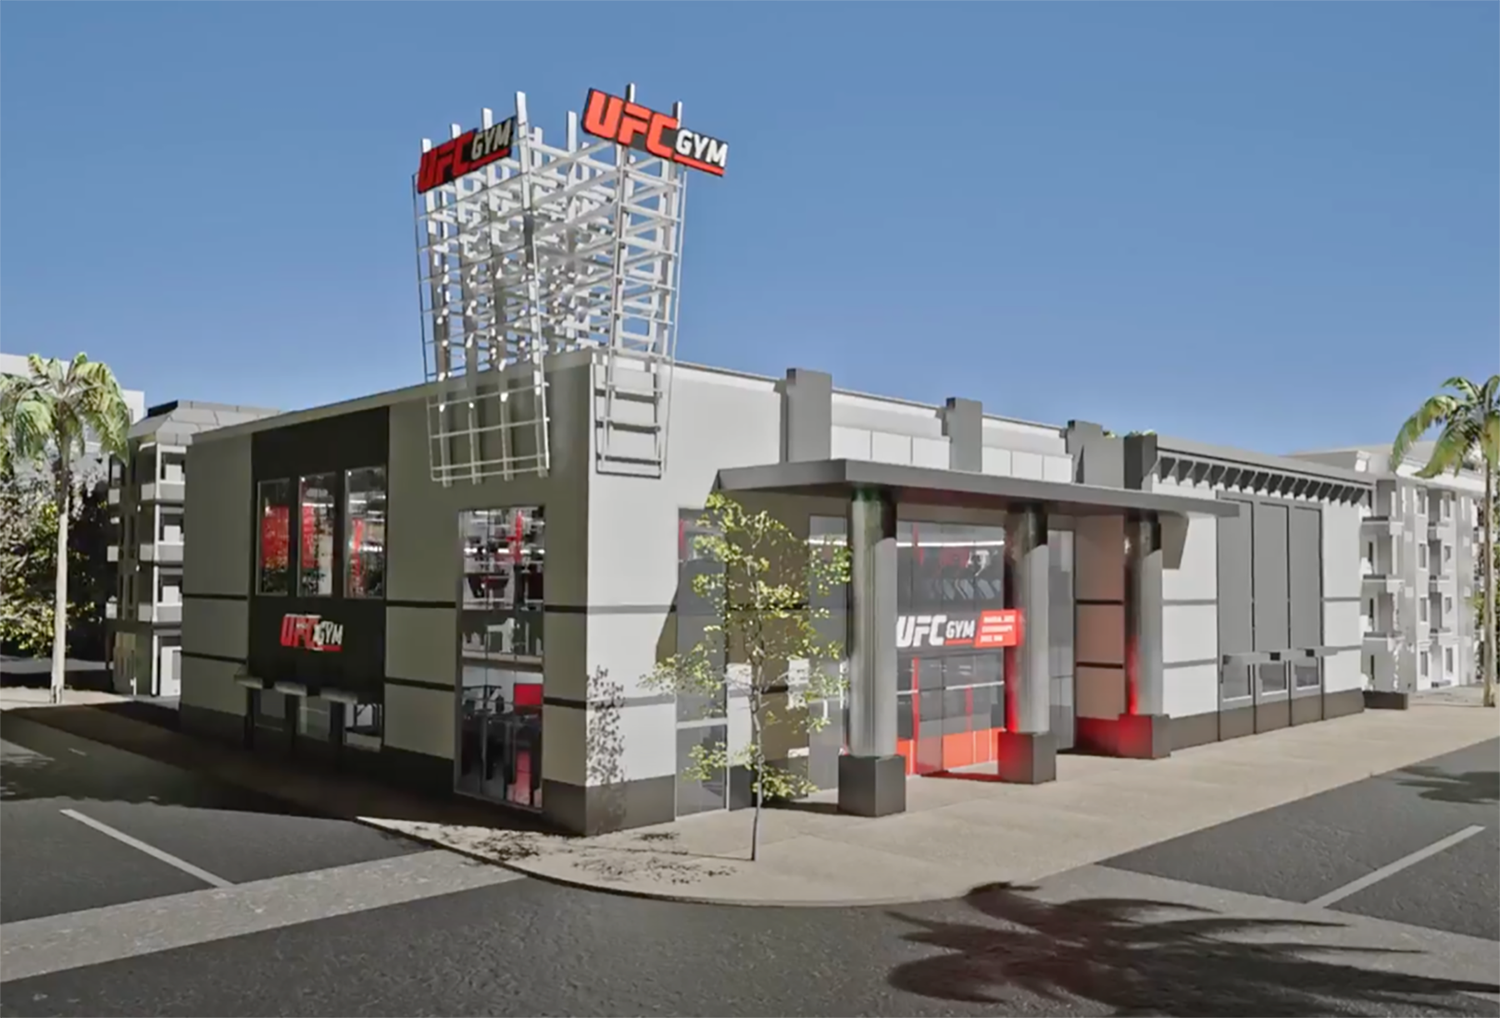 Wood Investments Companies Acquires 30,000 SF Former Tower Records Building in Downtown Brea, Calif., and Signs Lease with UFC GYM